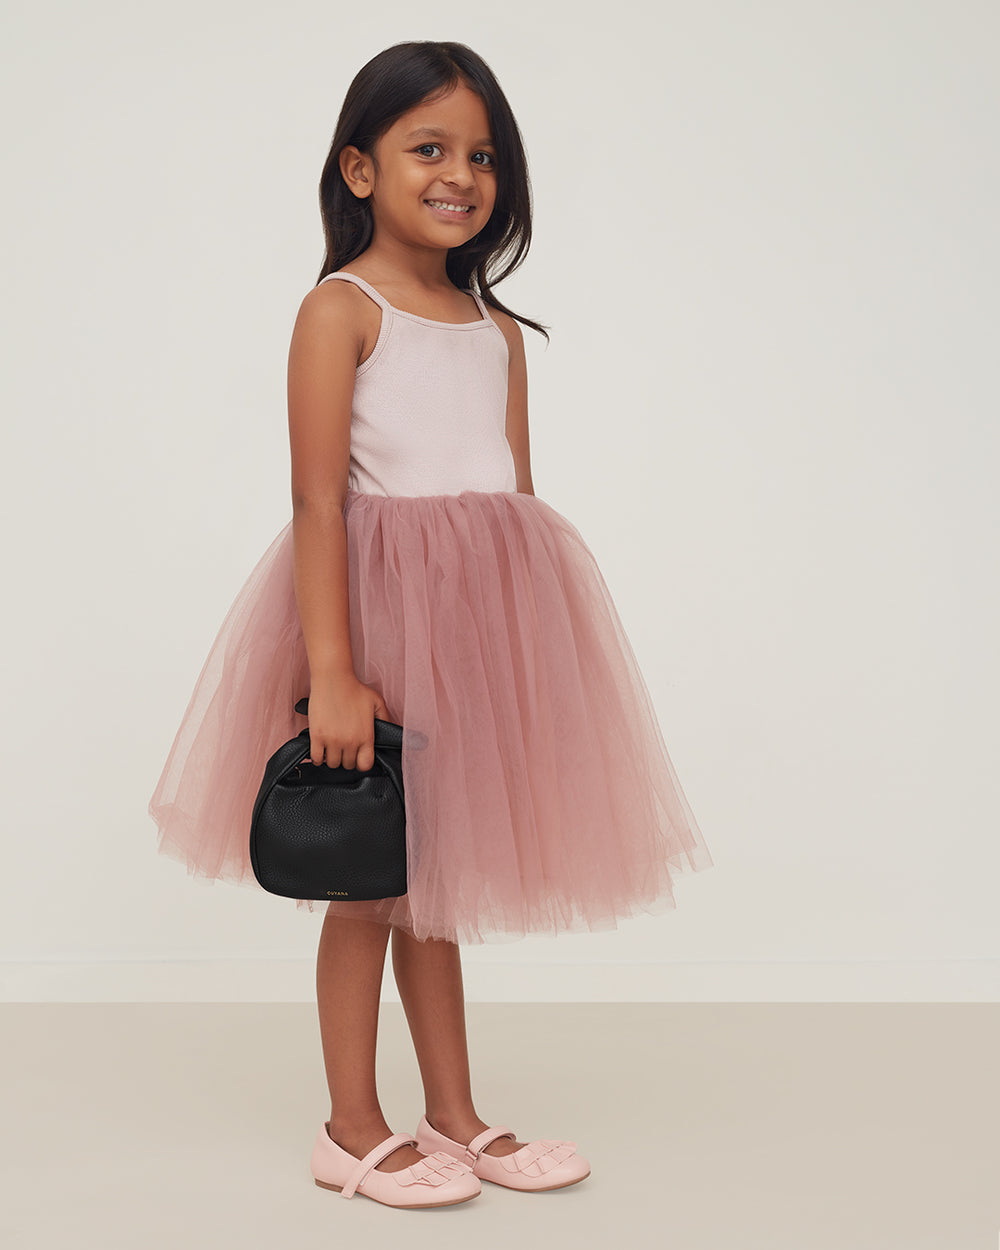 Young girl in a tutu and ballet flats holding a handbag.